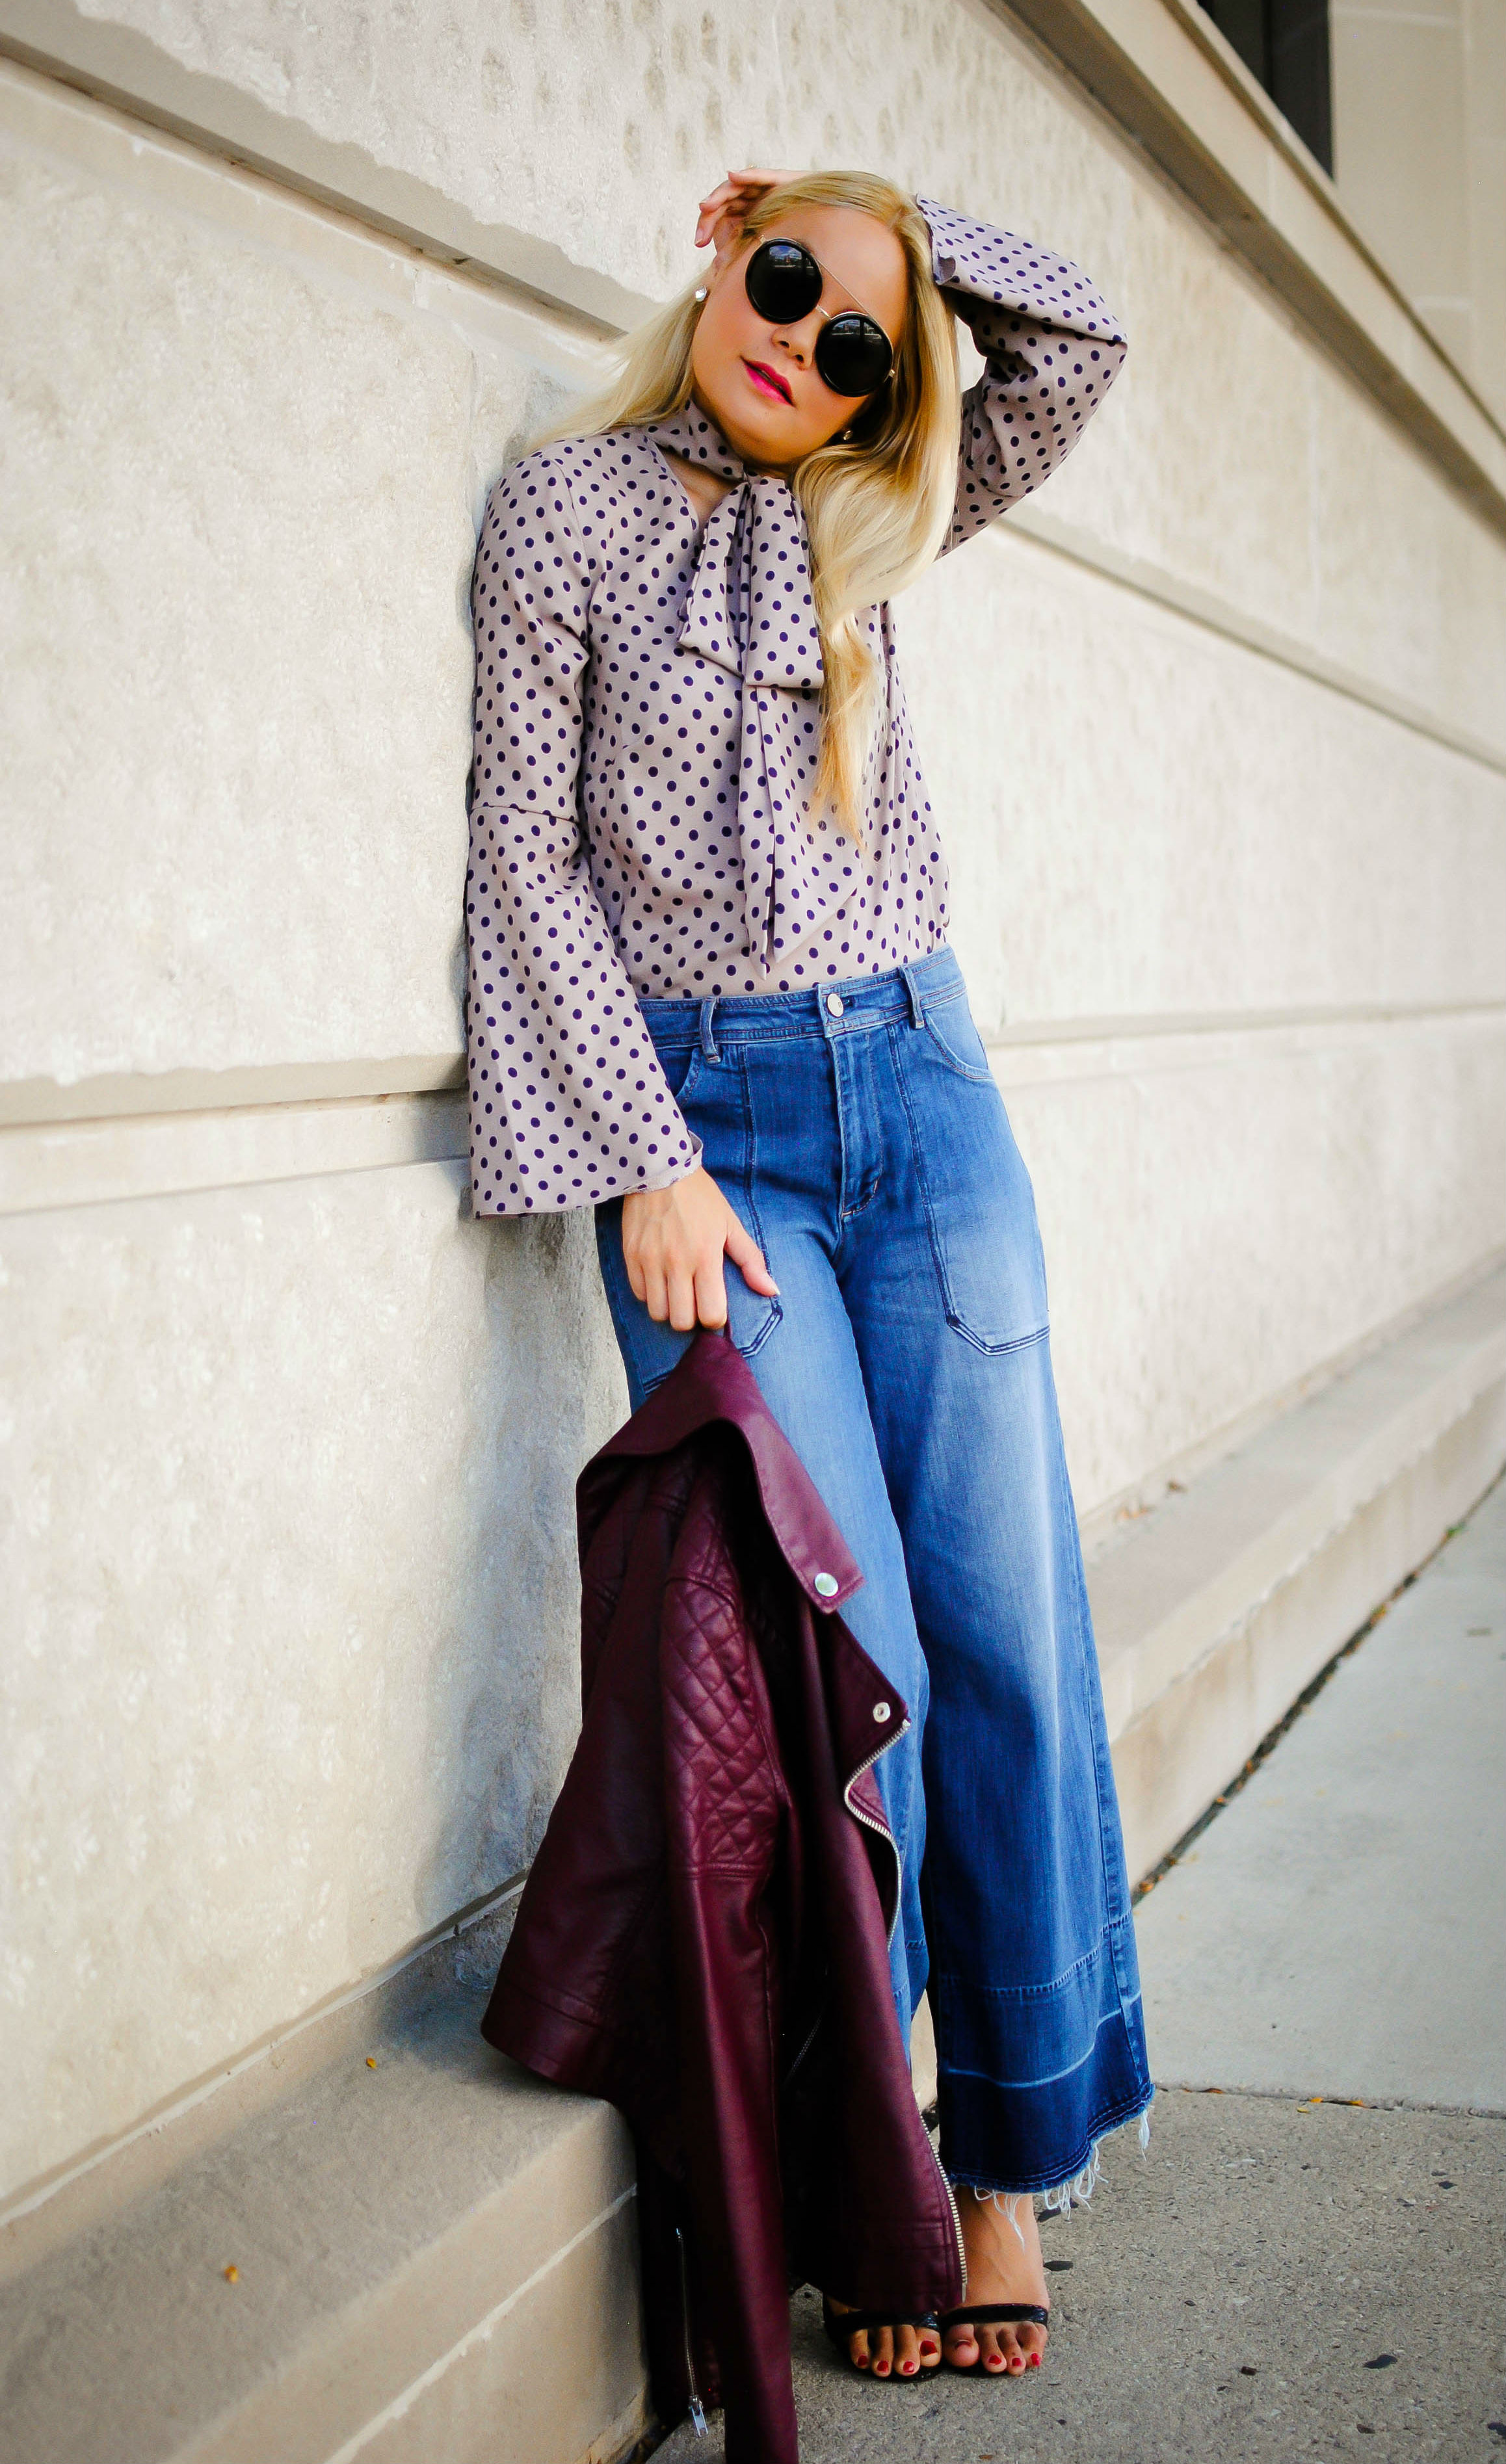 Transition Your Summer Wardrobe to Fall Fashion_Denim Culottes_Polka Dot Blouse_Bow Tie Blouse_Leather Moto Jacket_Fall Transition_What Would V Wear_1